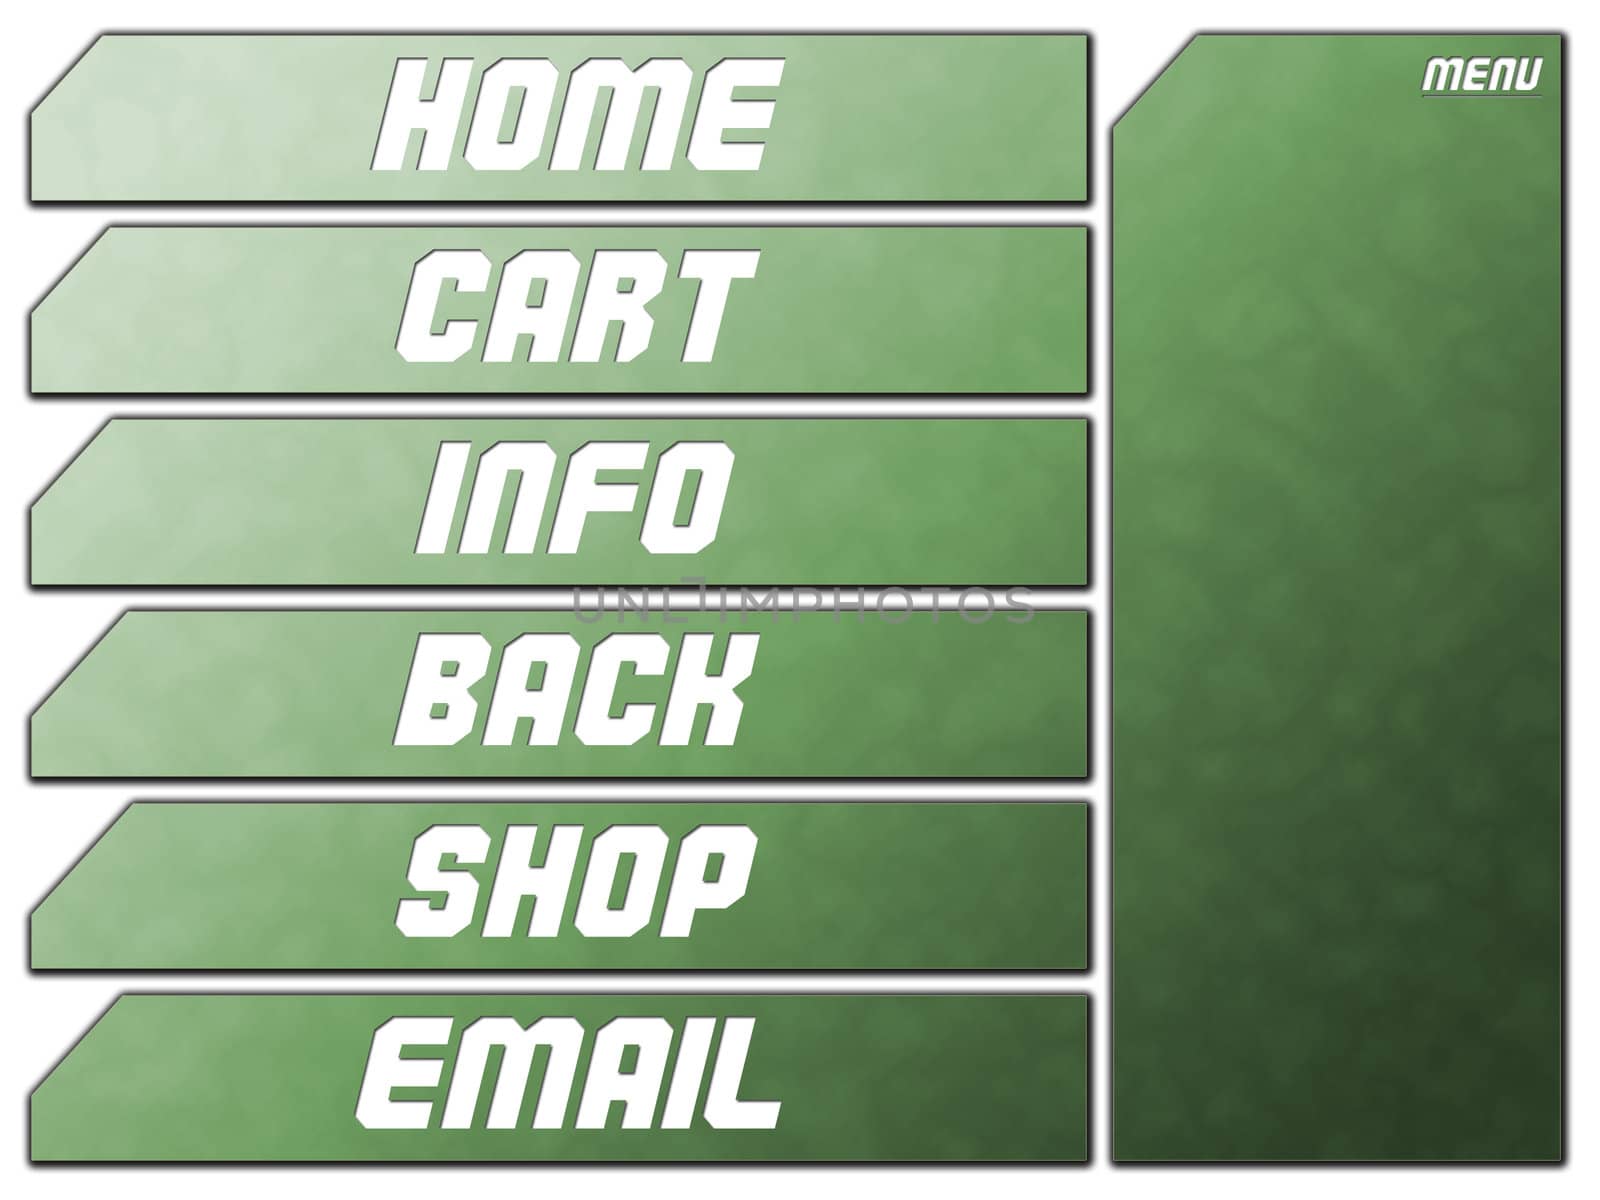 Green Futuristic Website Navigation Stone Buttons Home Cart Infor Back Shop Email